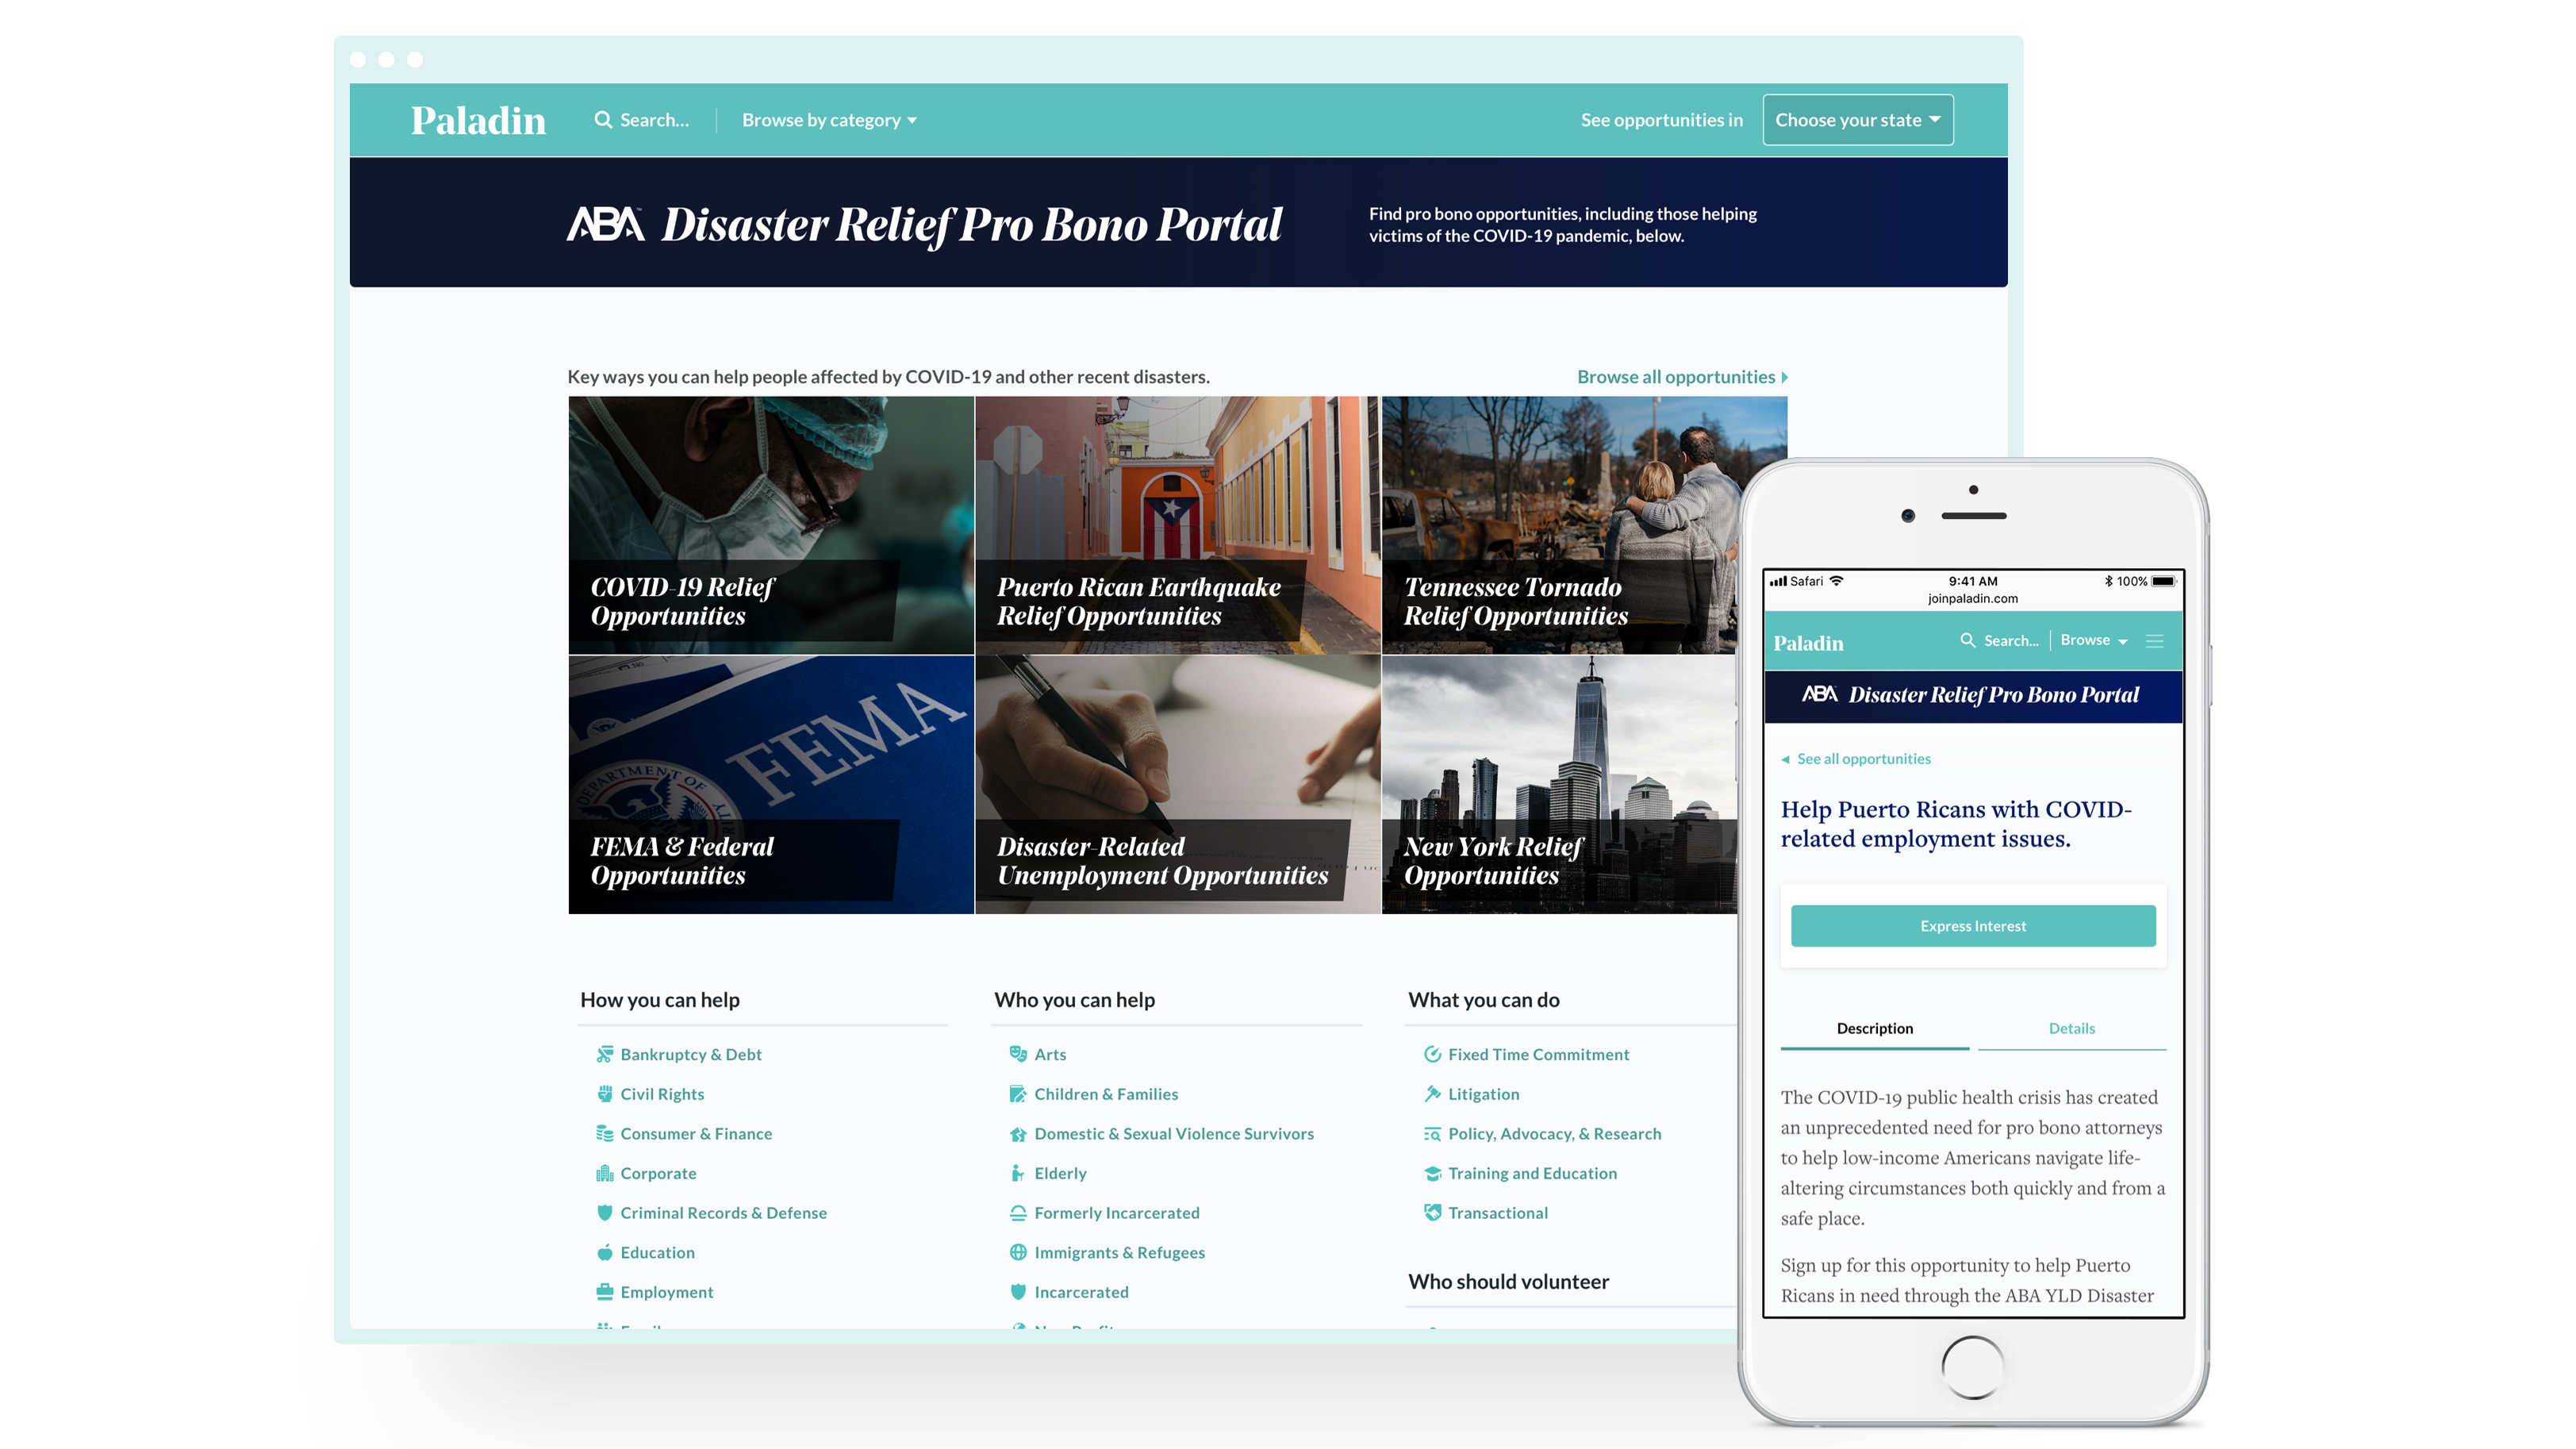 Tech Companies, ABA, Partner to Launch National Pro Bono Portal Targeting COVID-19 and Disaster Relief